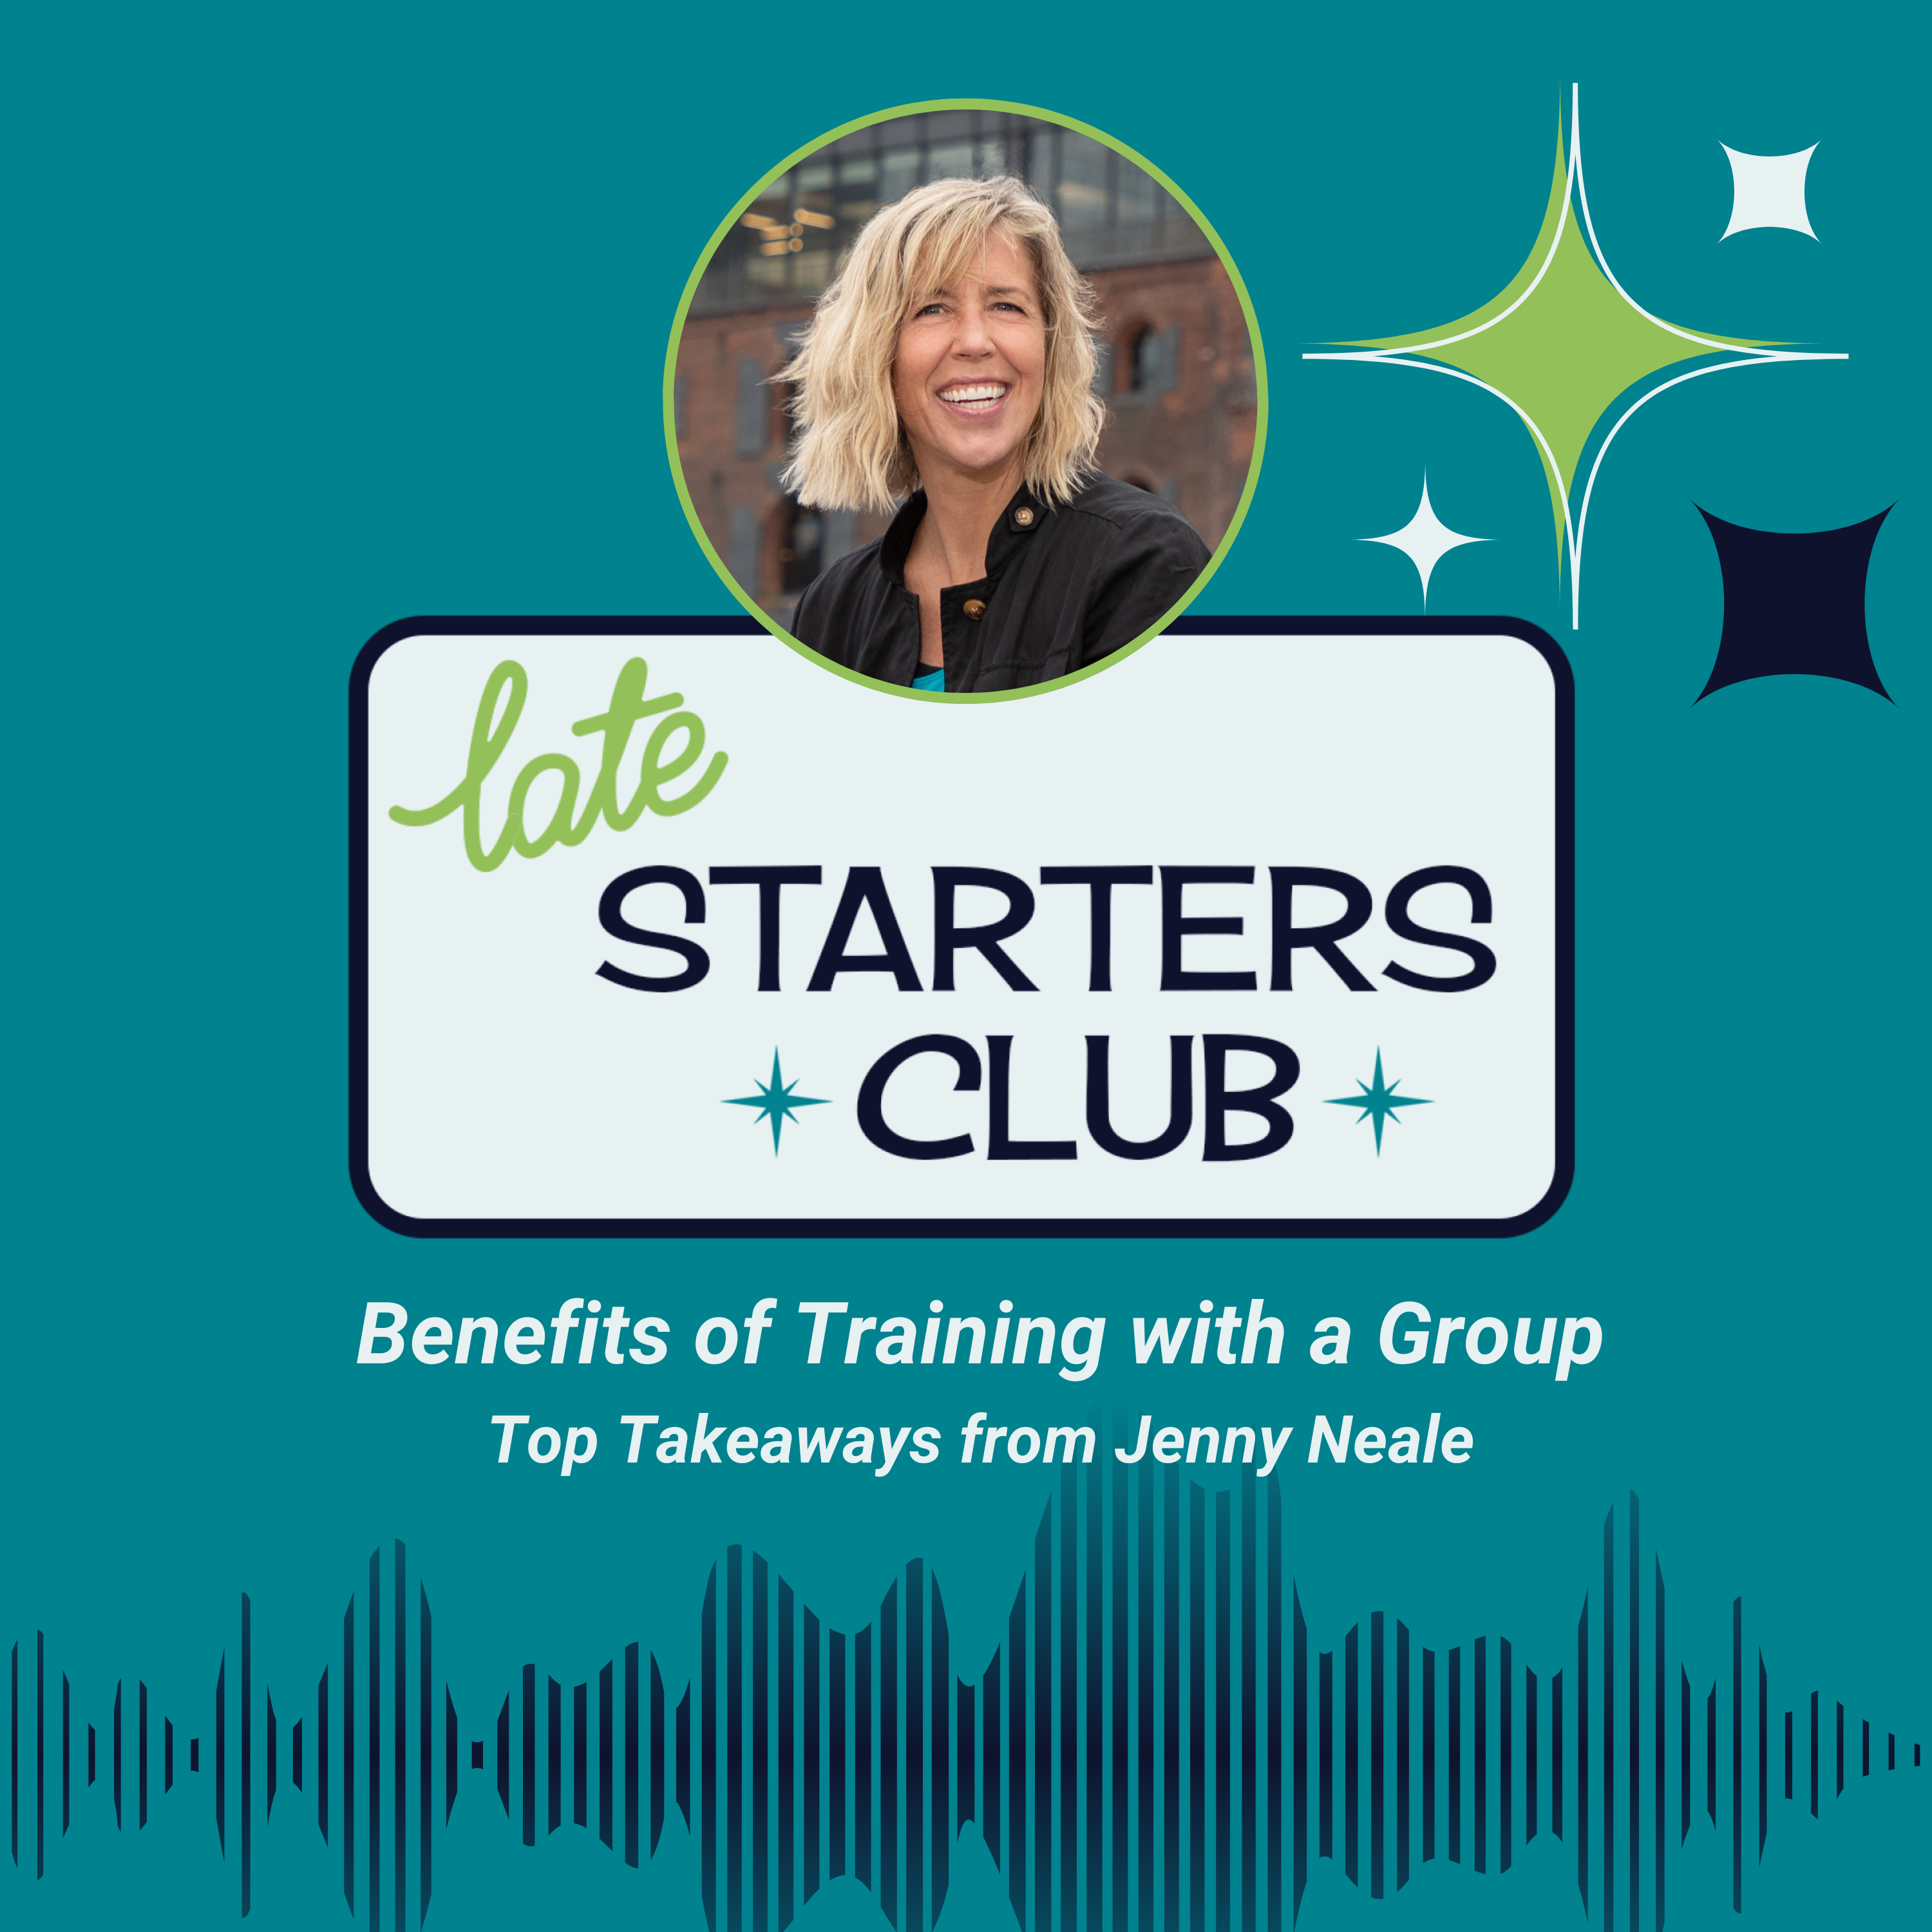 50: Benefits of Training with a Group – Top Takeaways from Jenny Neale